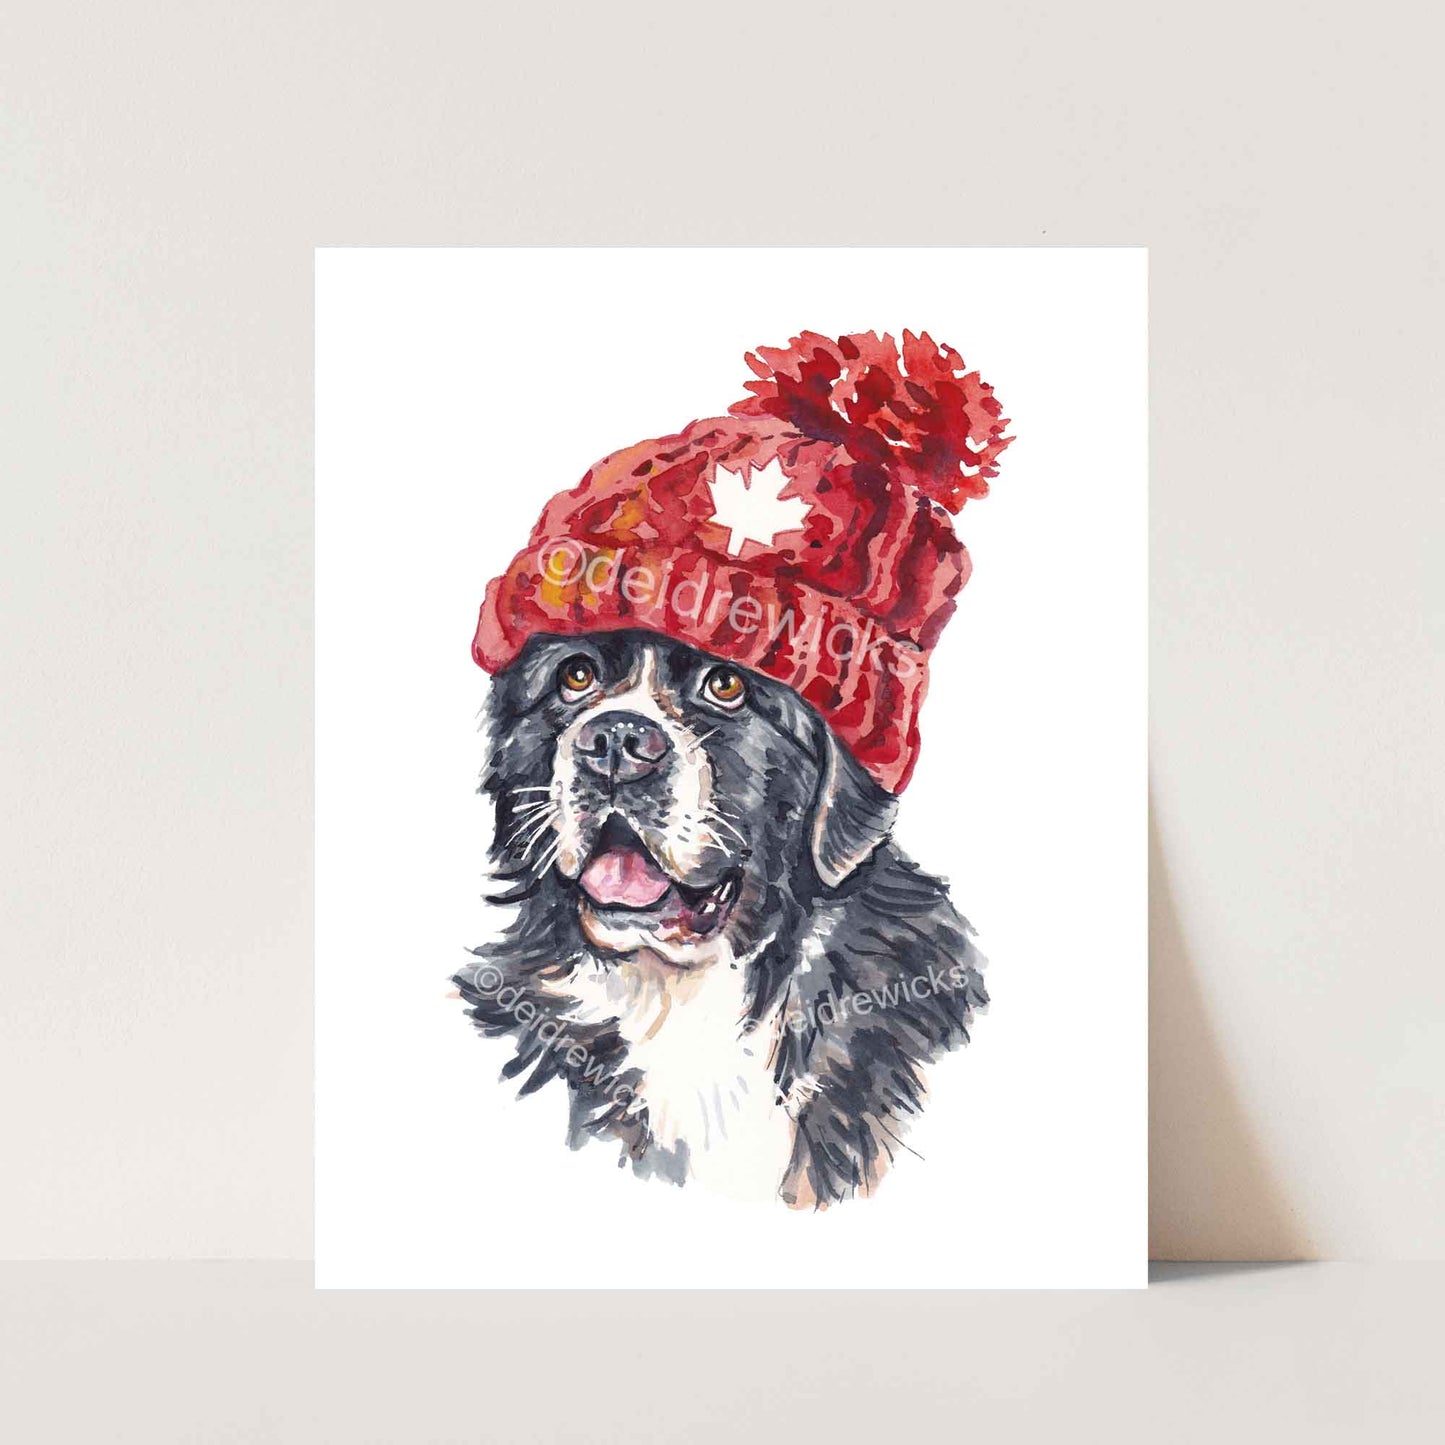 Dog watercolour print of a Newfoundland doggie wearing a knitted hat. He's ready for Winter